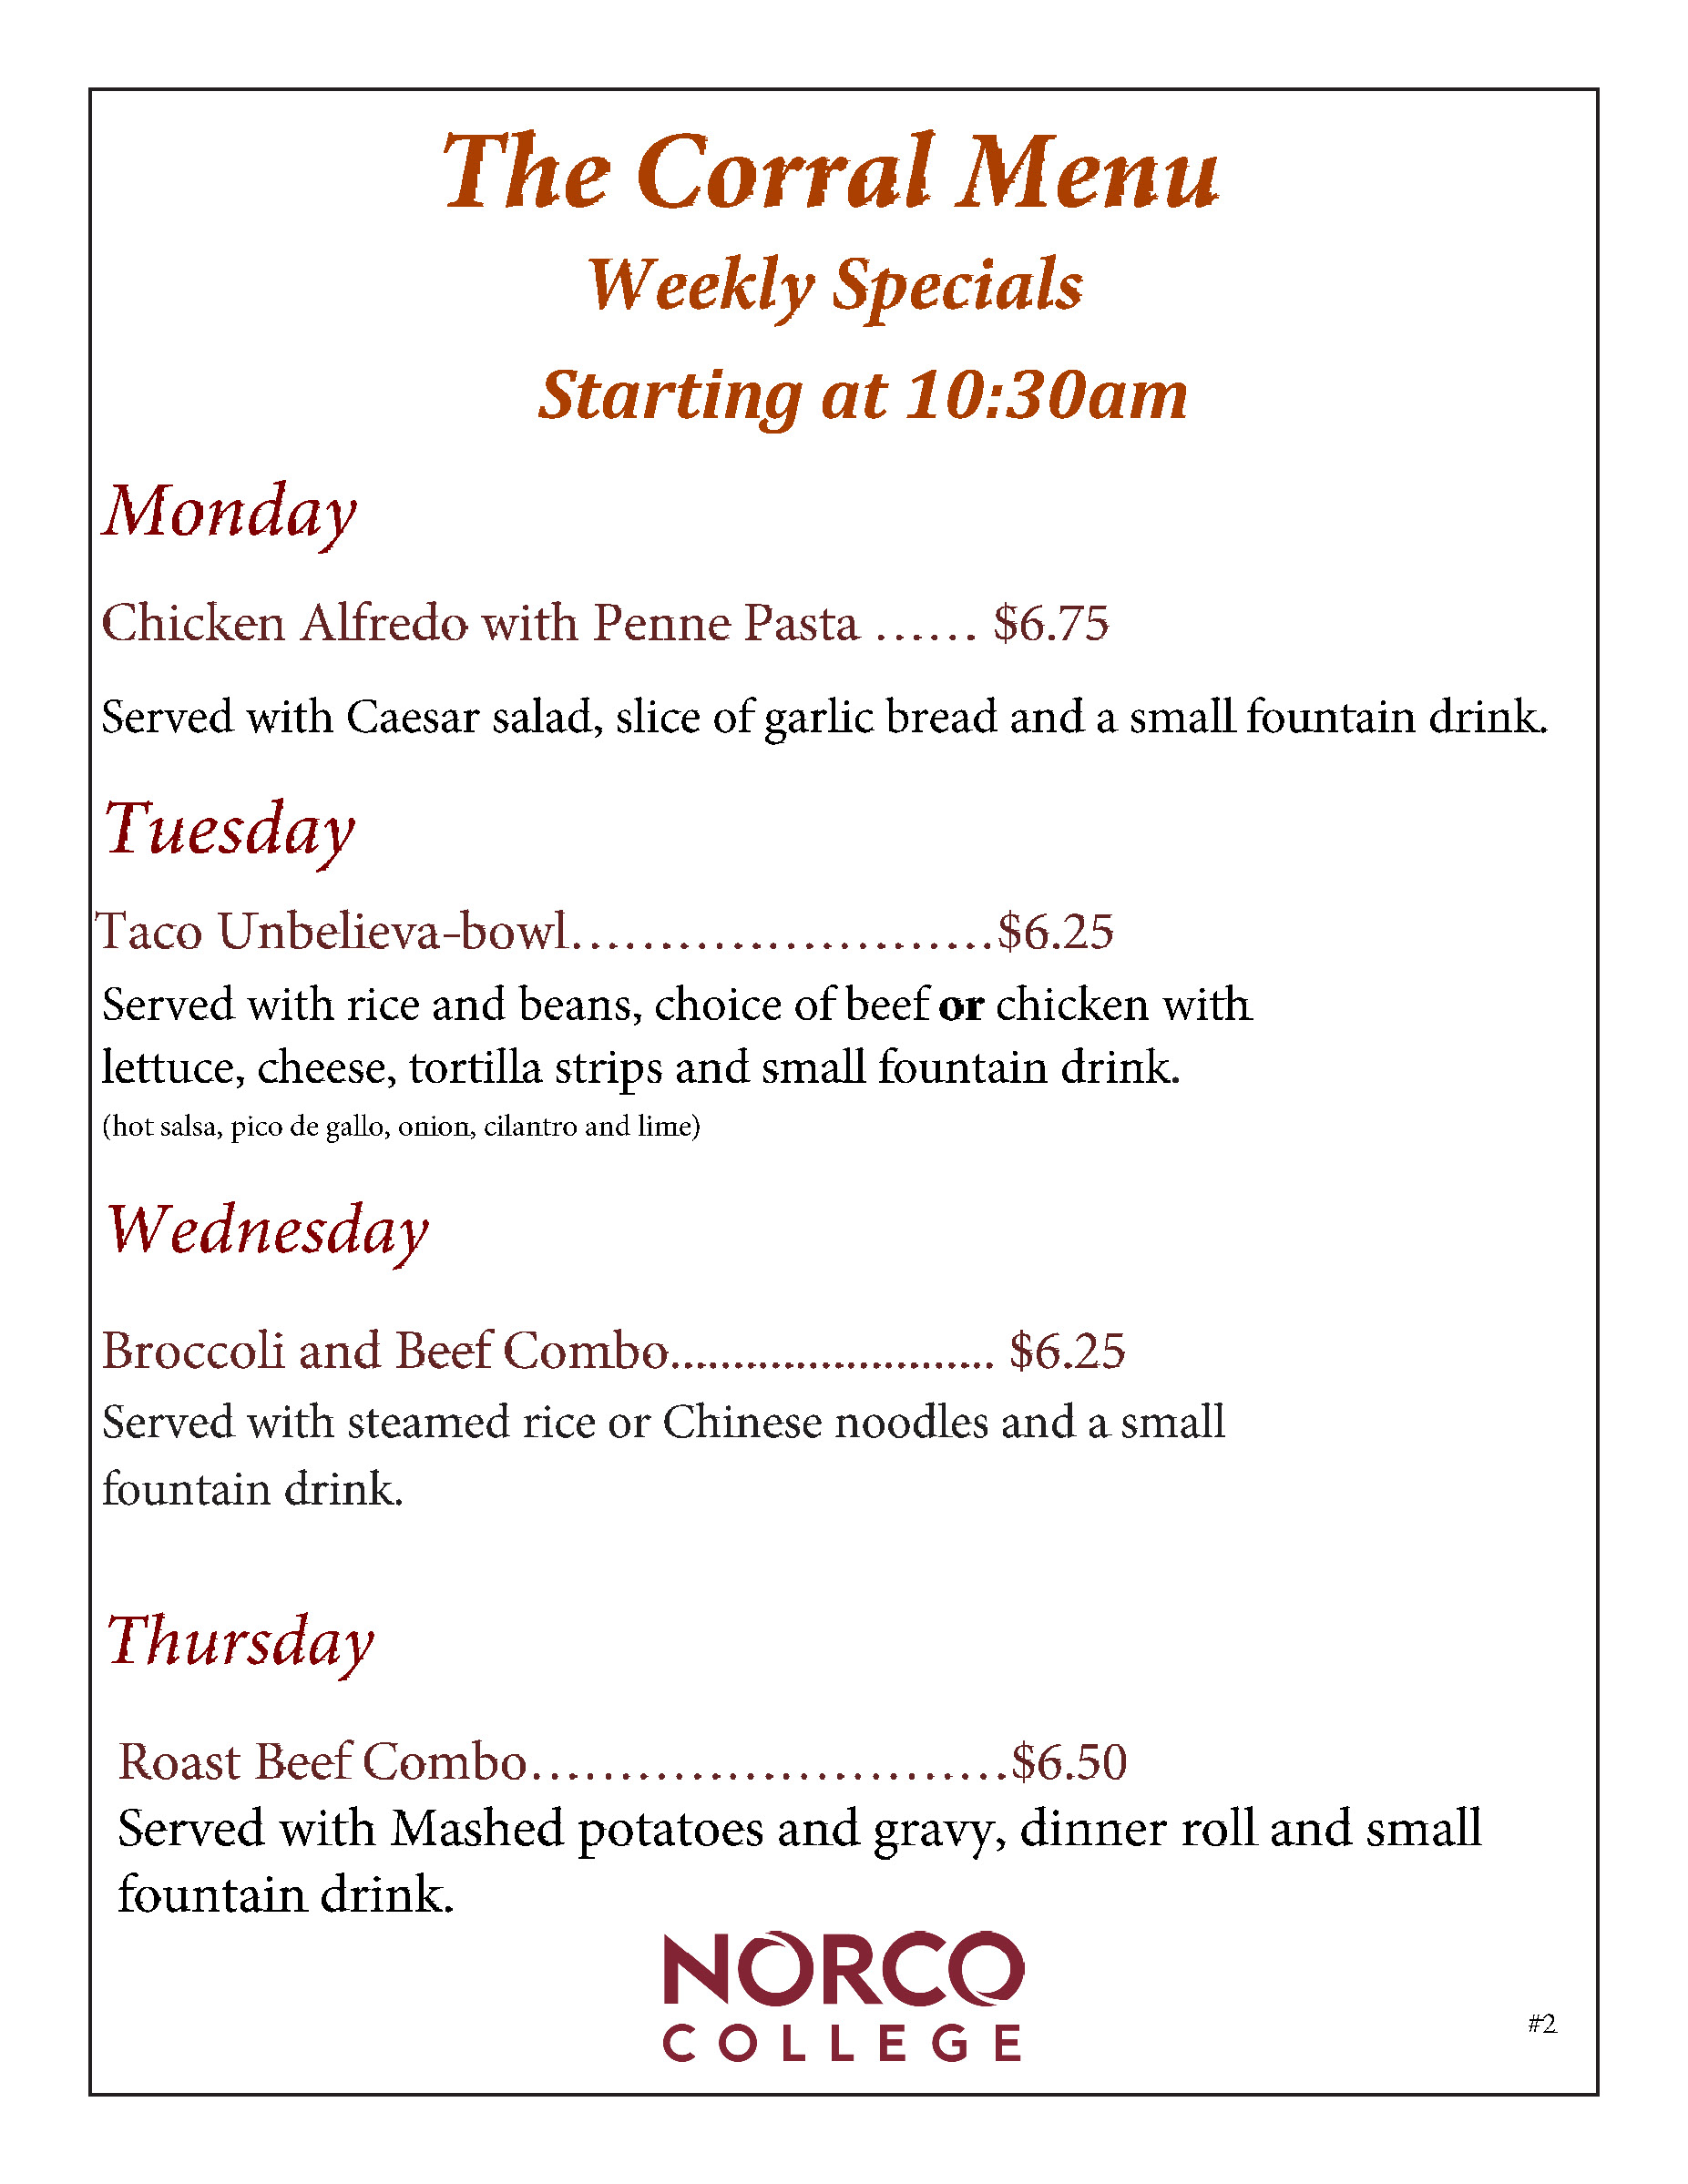 Food Services Weekly Special 1